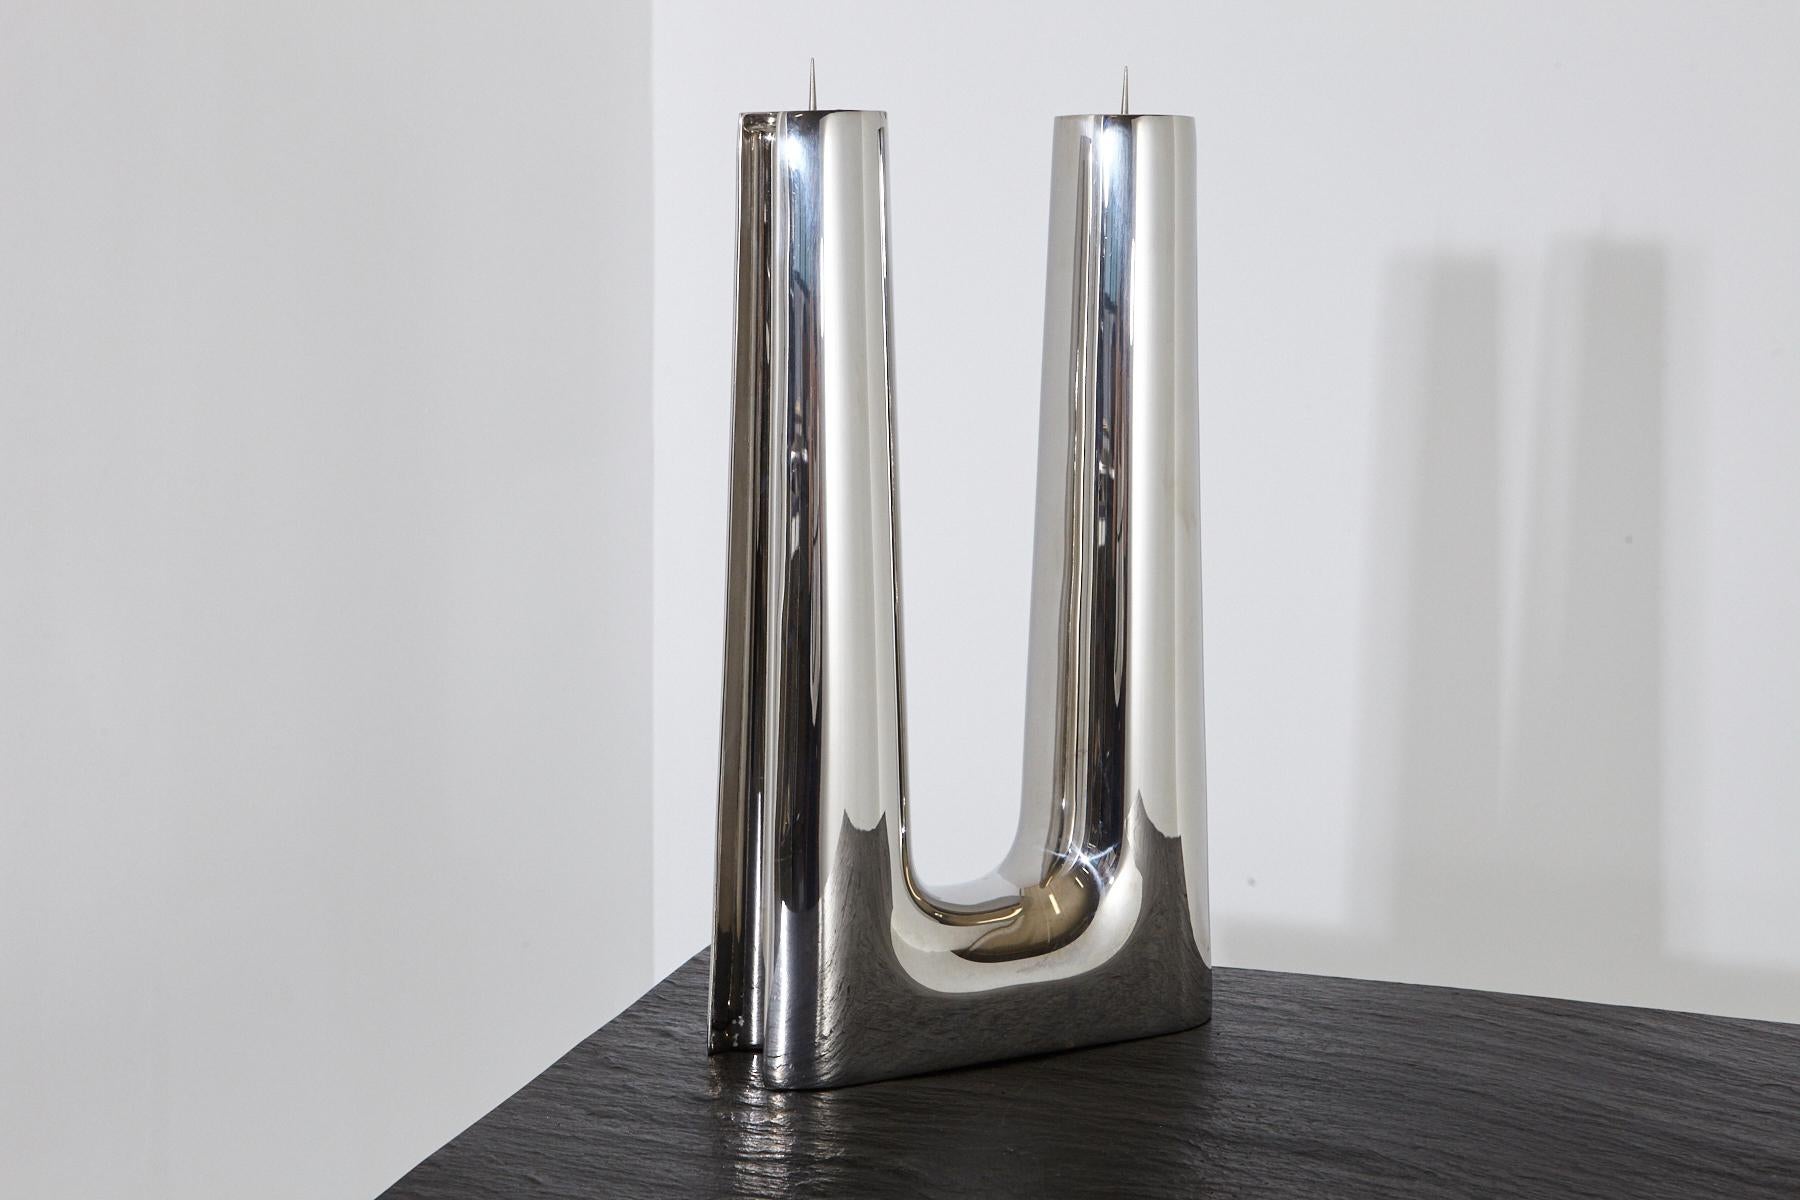 A modern, simple, Minimalist polished stainless steel candleholder by Georg Jensen for two candles. 
The candle holder has some minor scratches to the surface consistent to use.